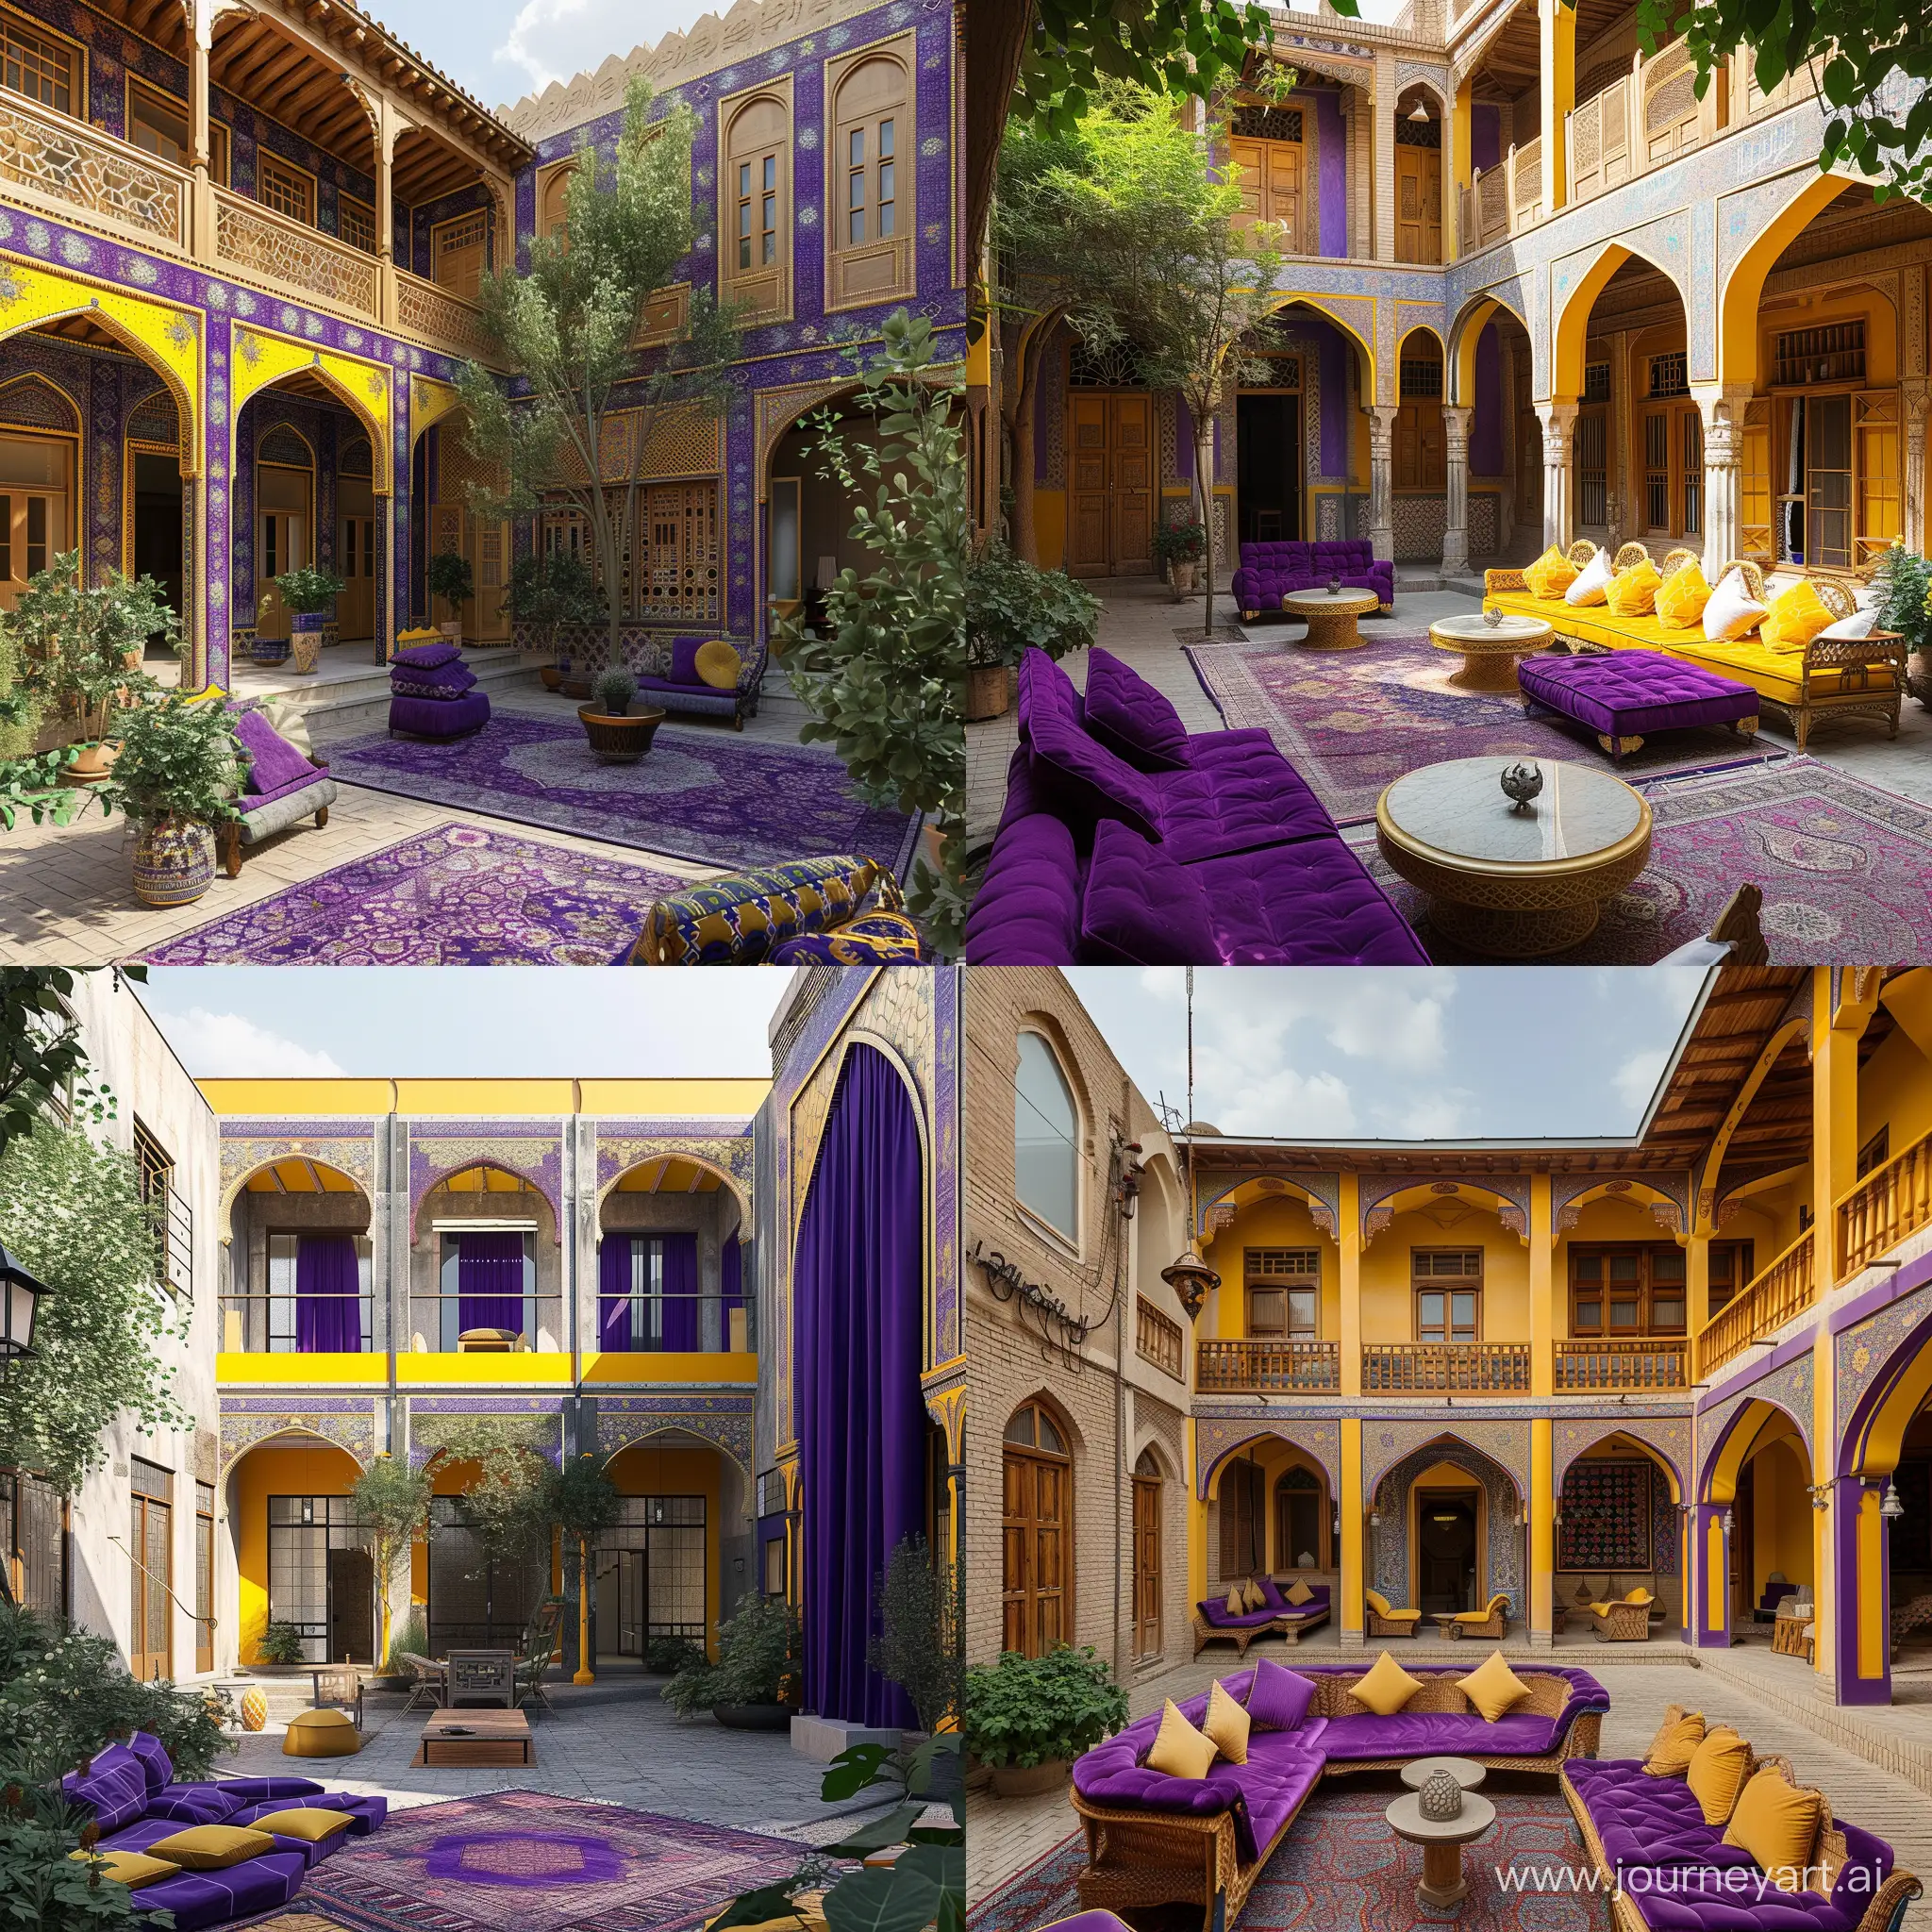 Old Persian house with courtyard and purple and yellow theme